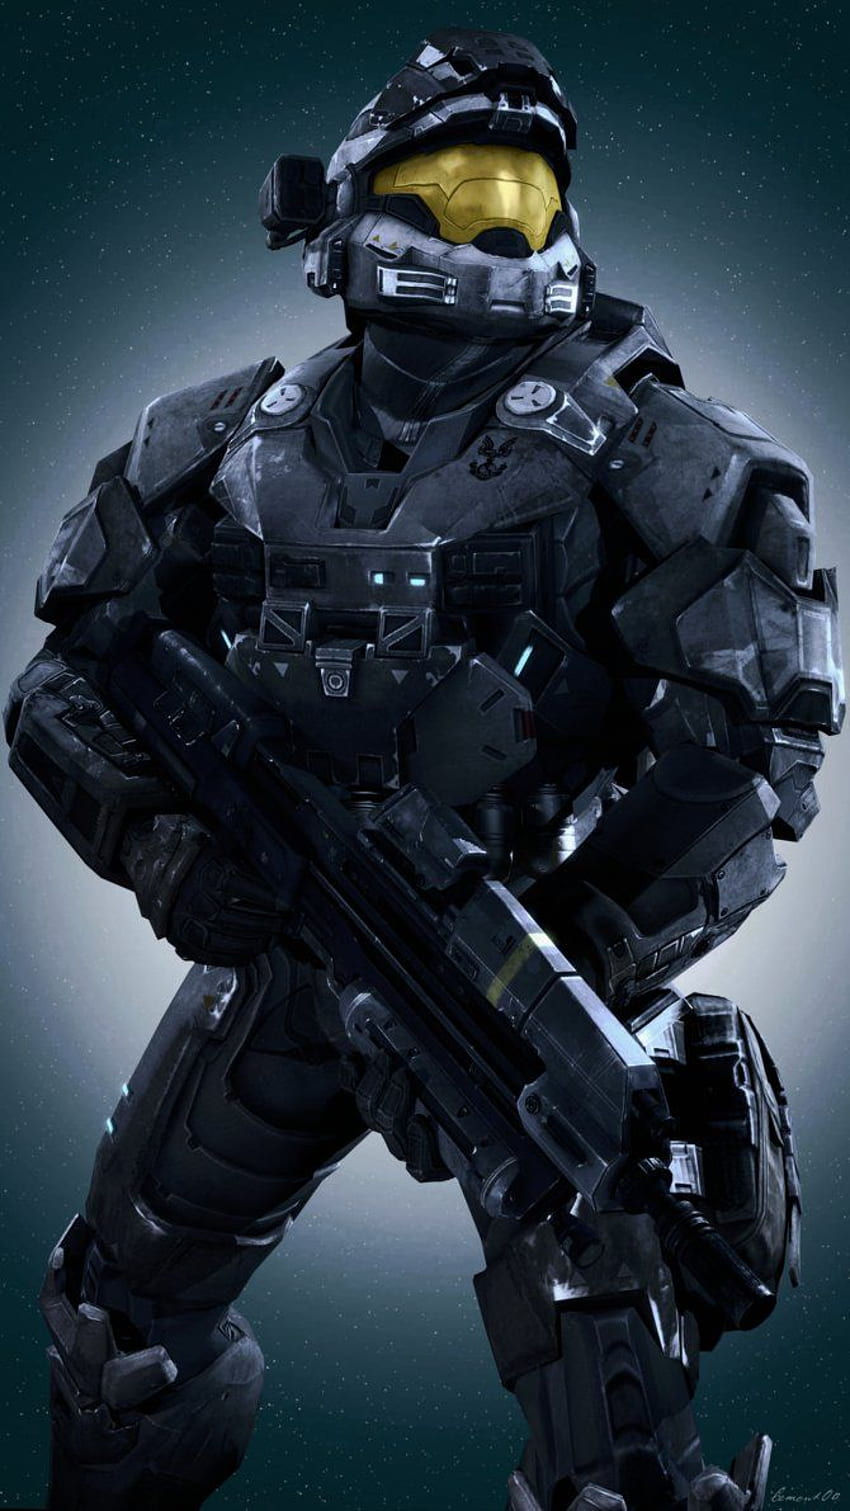 Halo Reach - Noble Six \ Multiplayer Spartans an. Halo Reach, Halo Armor, Halo Spartan, Noble 6 HD-Handy-Hintergrundbild